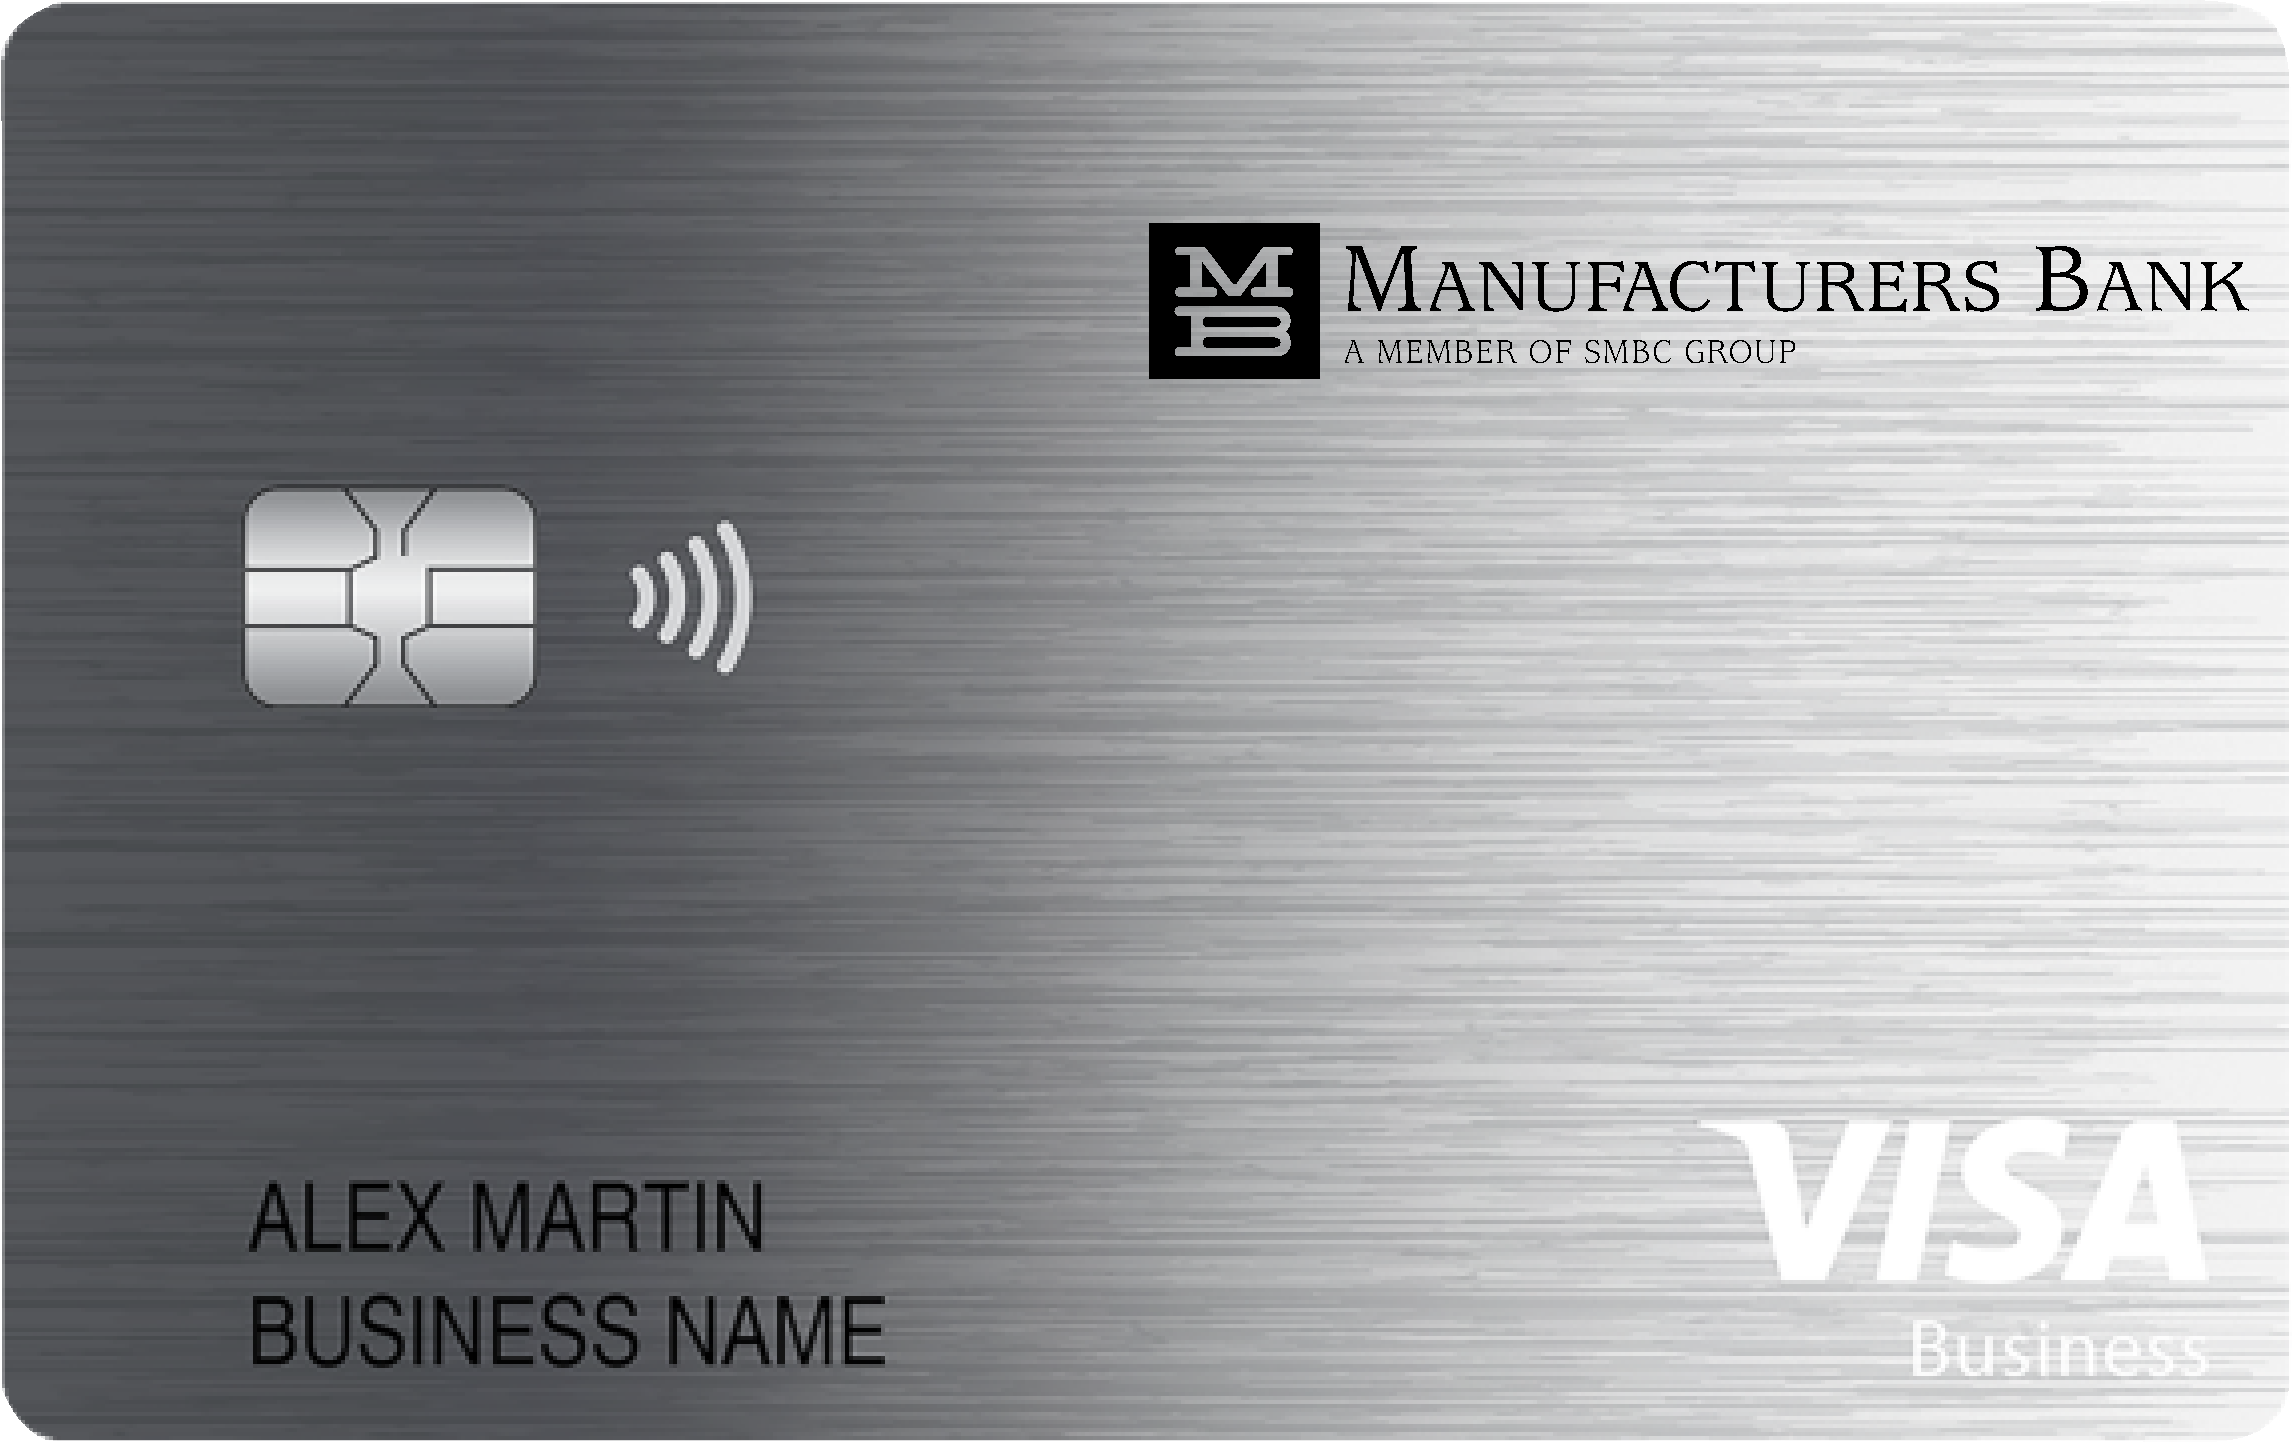 Manufacturers Bank Business Cash Preferred Card